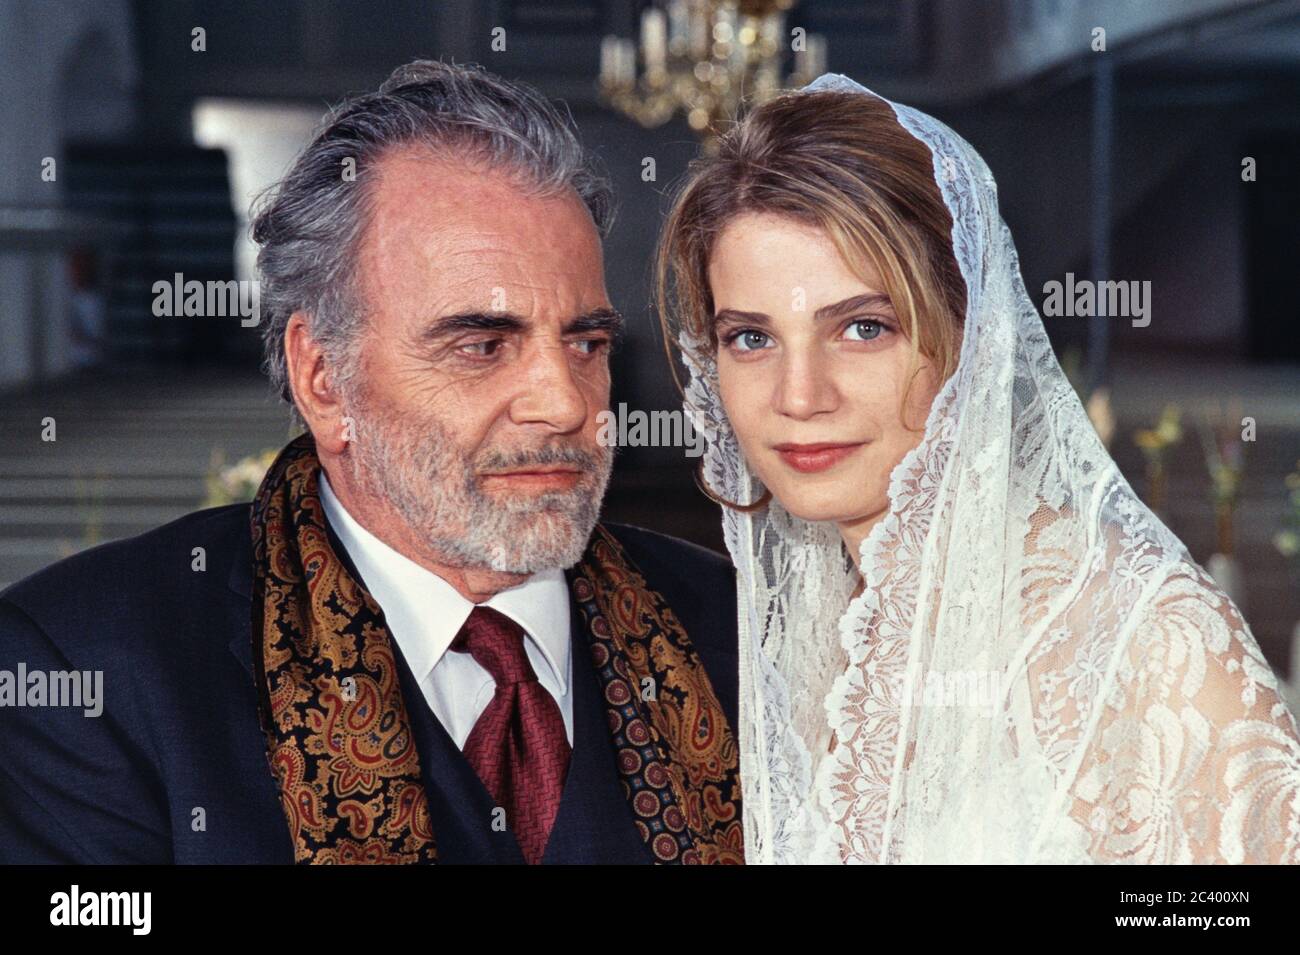 June 24th, 2002, Rinkenis, Denmark, Maximilian Schell and Rike Schmid at a press meeting for the ZDF series 'Der Furst und das Madchen'. Still picture as a newlyweds in the church of Rinkenis. M. Schell played the prince Friedrich von Thorwald, R. Schmid spelled Ursula Kaminski, née Countess von Lichtenthal, married by Thorwald. In 1962, Schell won the Oscar for Best Actor in 'The Judgment of Nurnberg'. Double portrait of the actor as a wedding couple. | usage worldwide Stock Photo